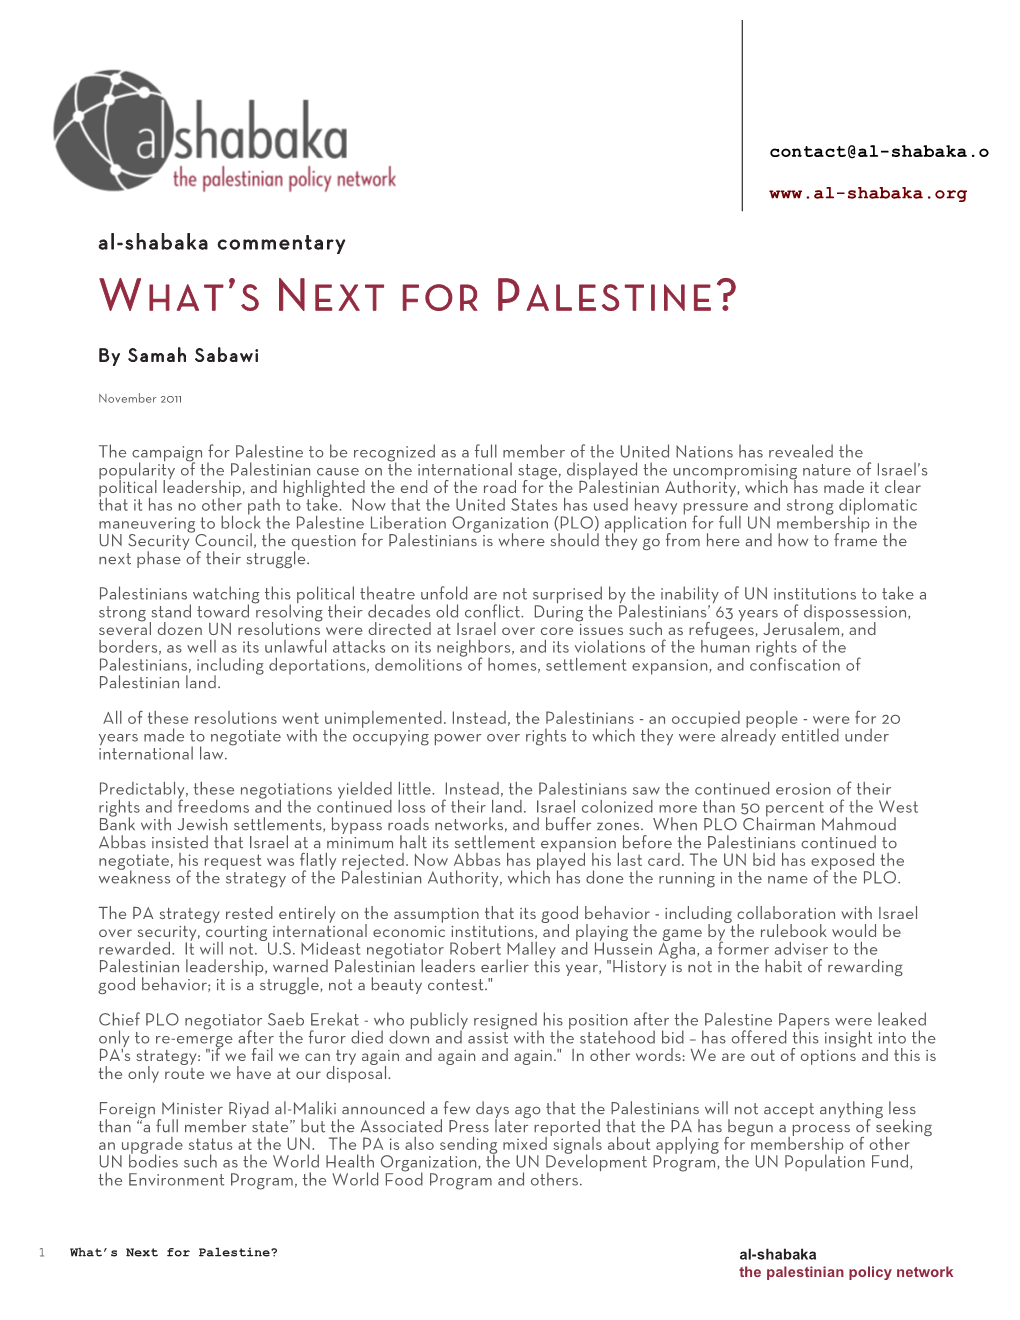 What's Next for Palestine? | Al-Shabaka Commentary